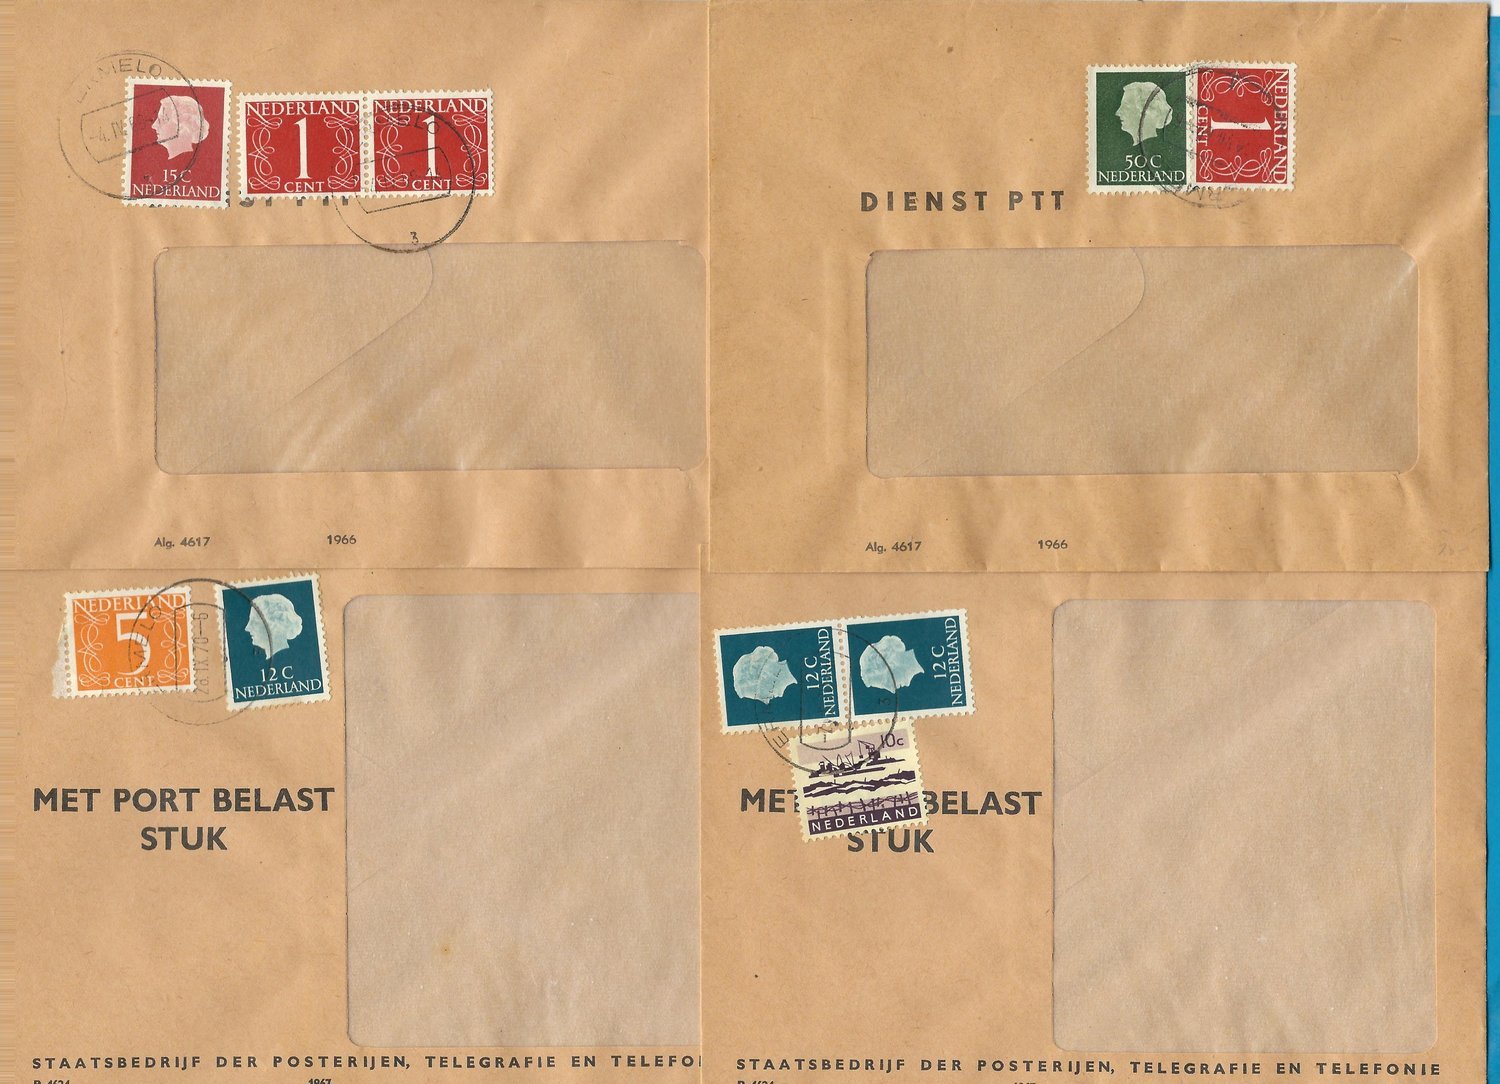 NETHERLANDS 4 PTT envelopes for postage due 1969-71 with postage stamps Ermelo